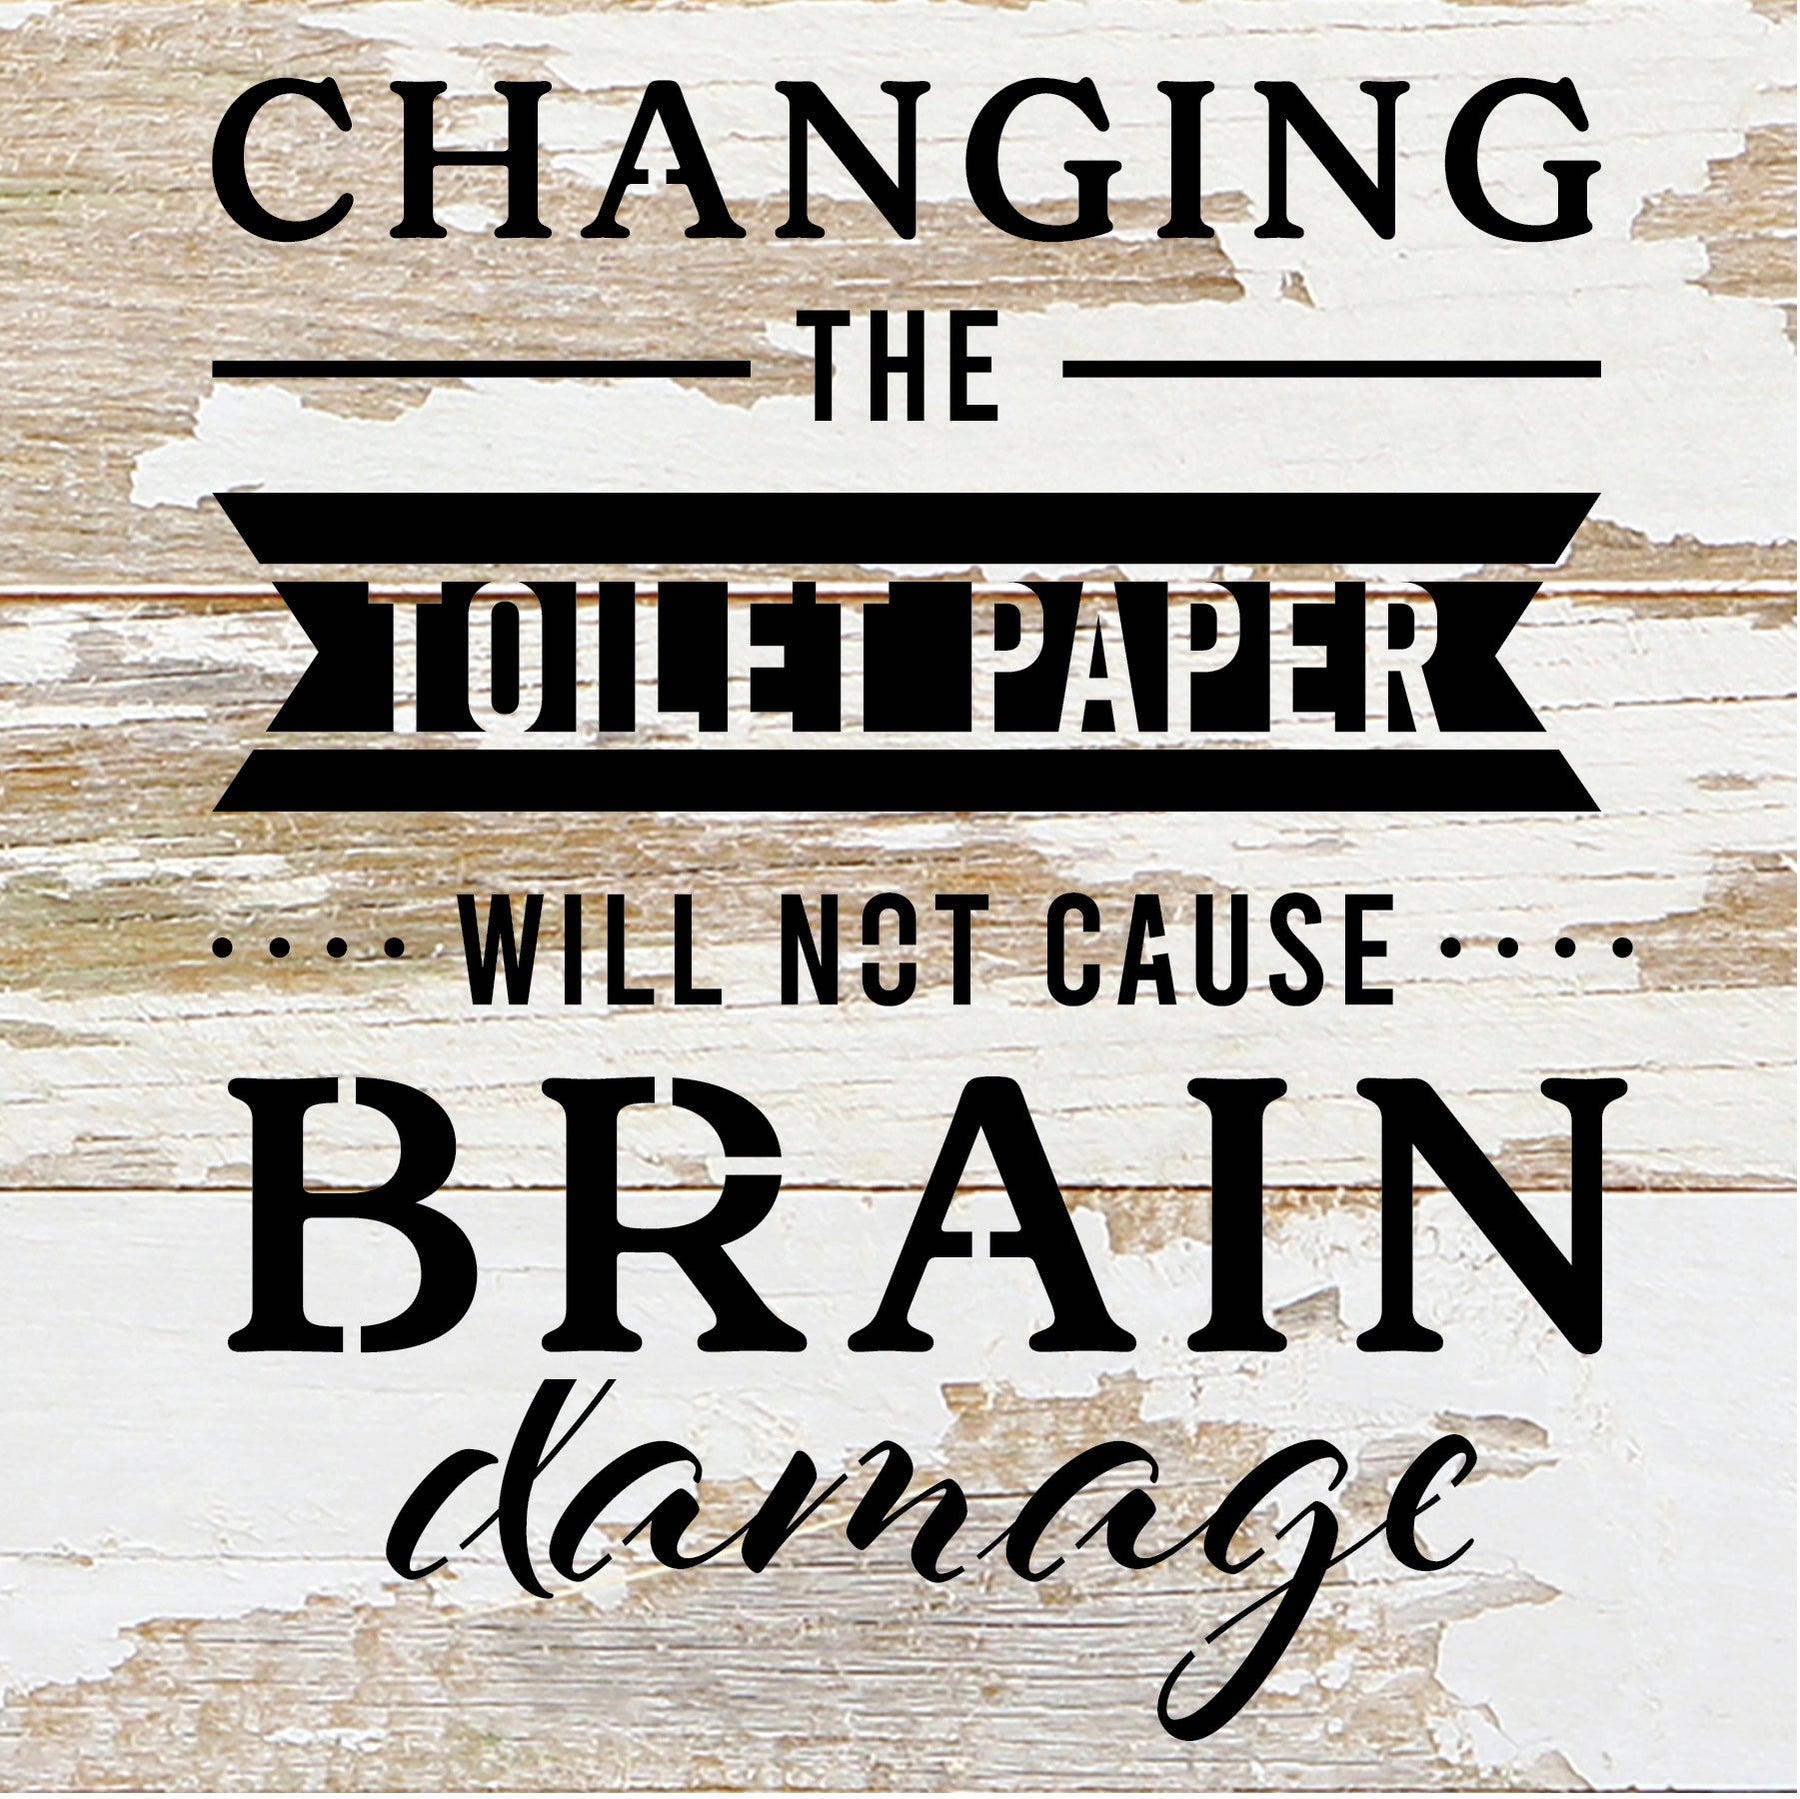 Changing the toilet paper will not cause Brain Damage / 6x6 Reclaimed Wood Sign